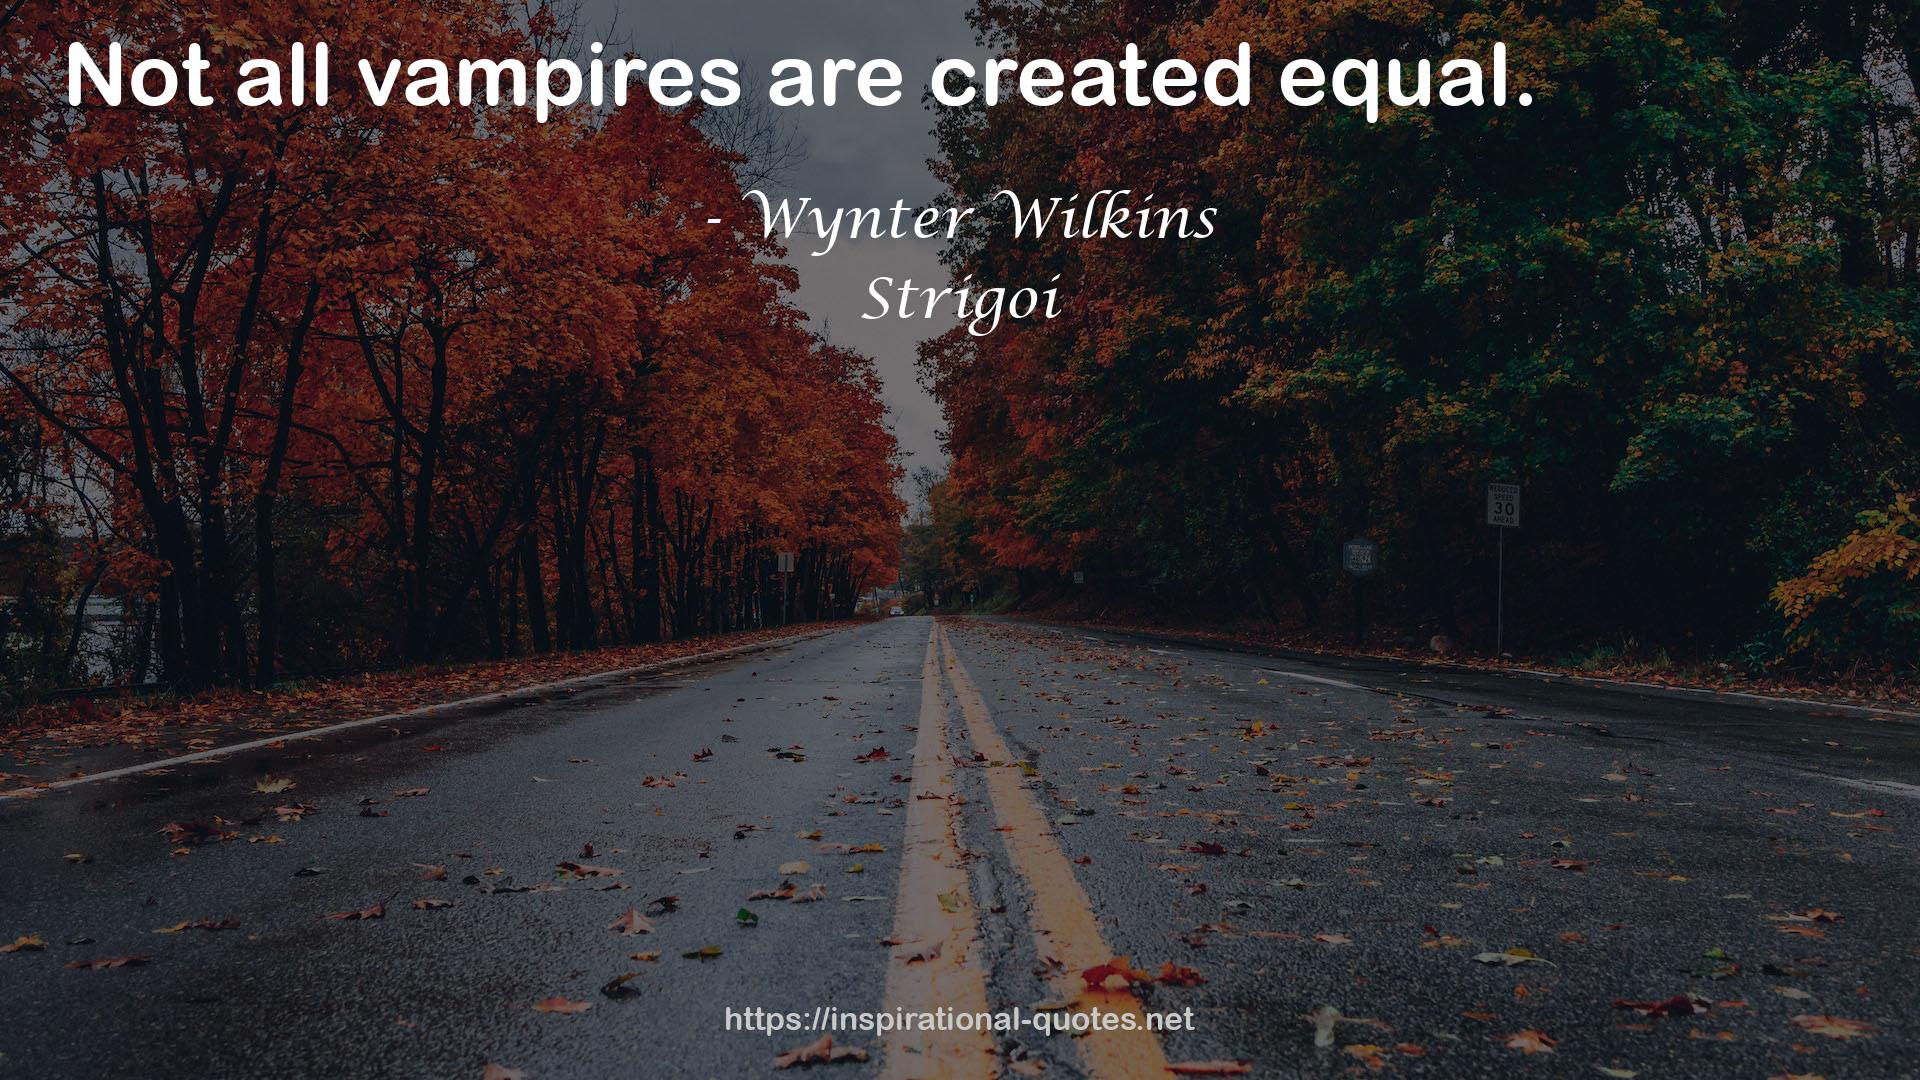 Wynter Wilkins QUOTES